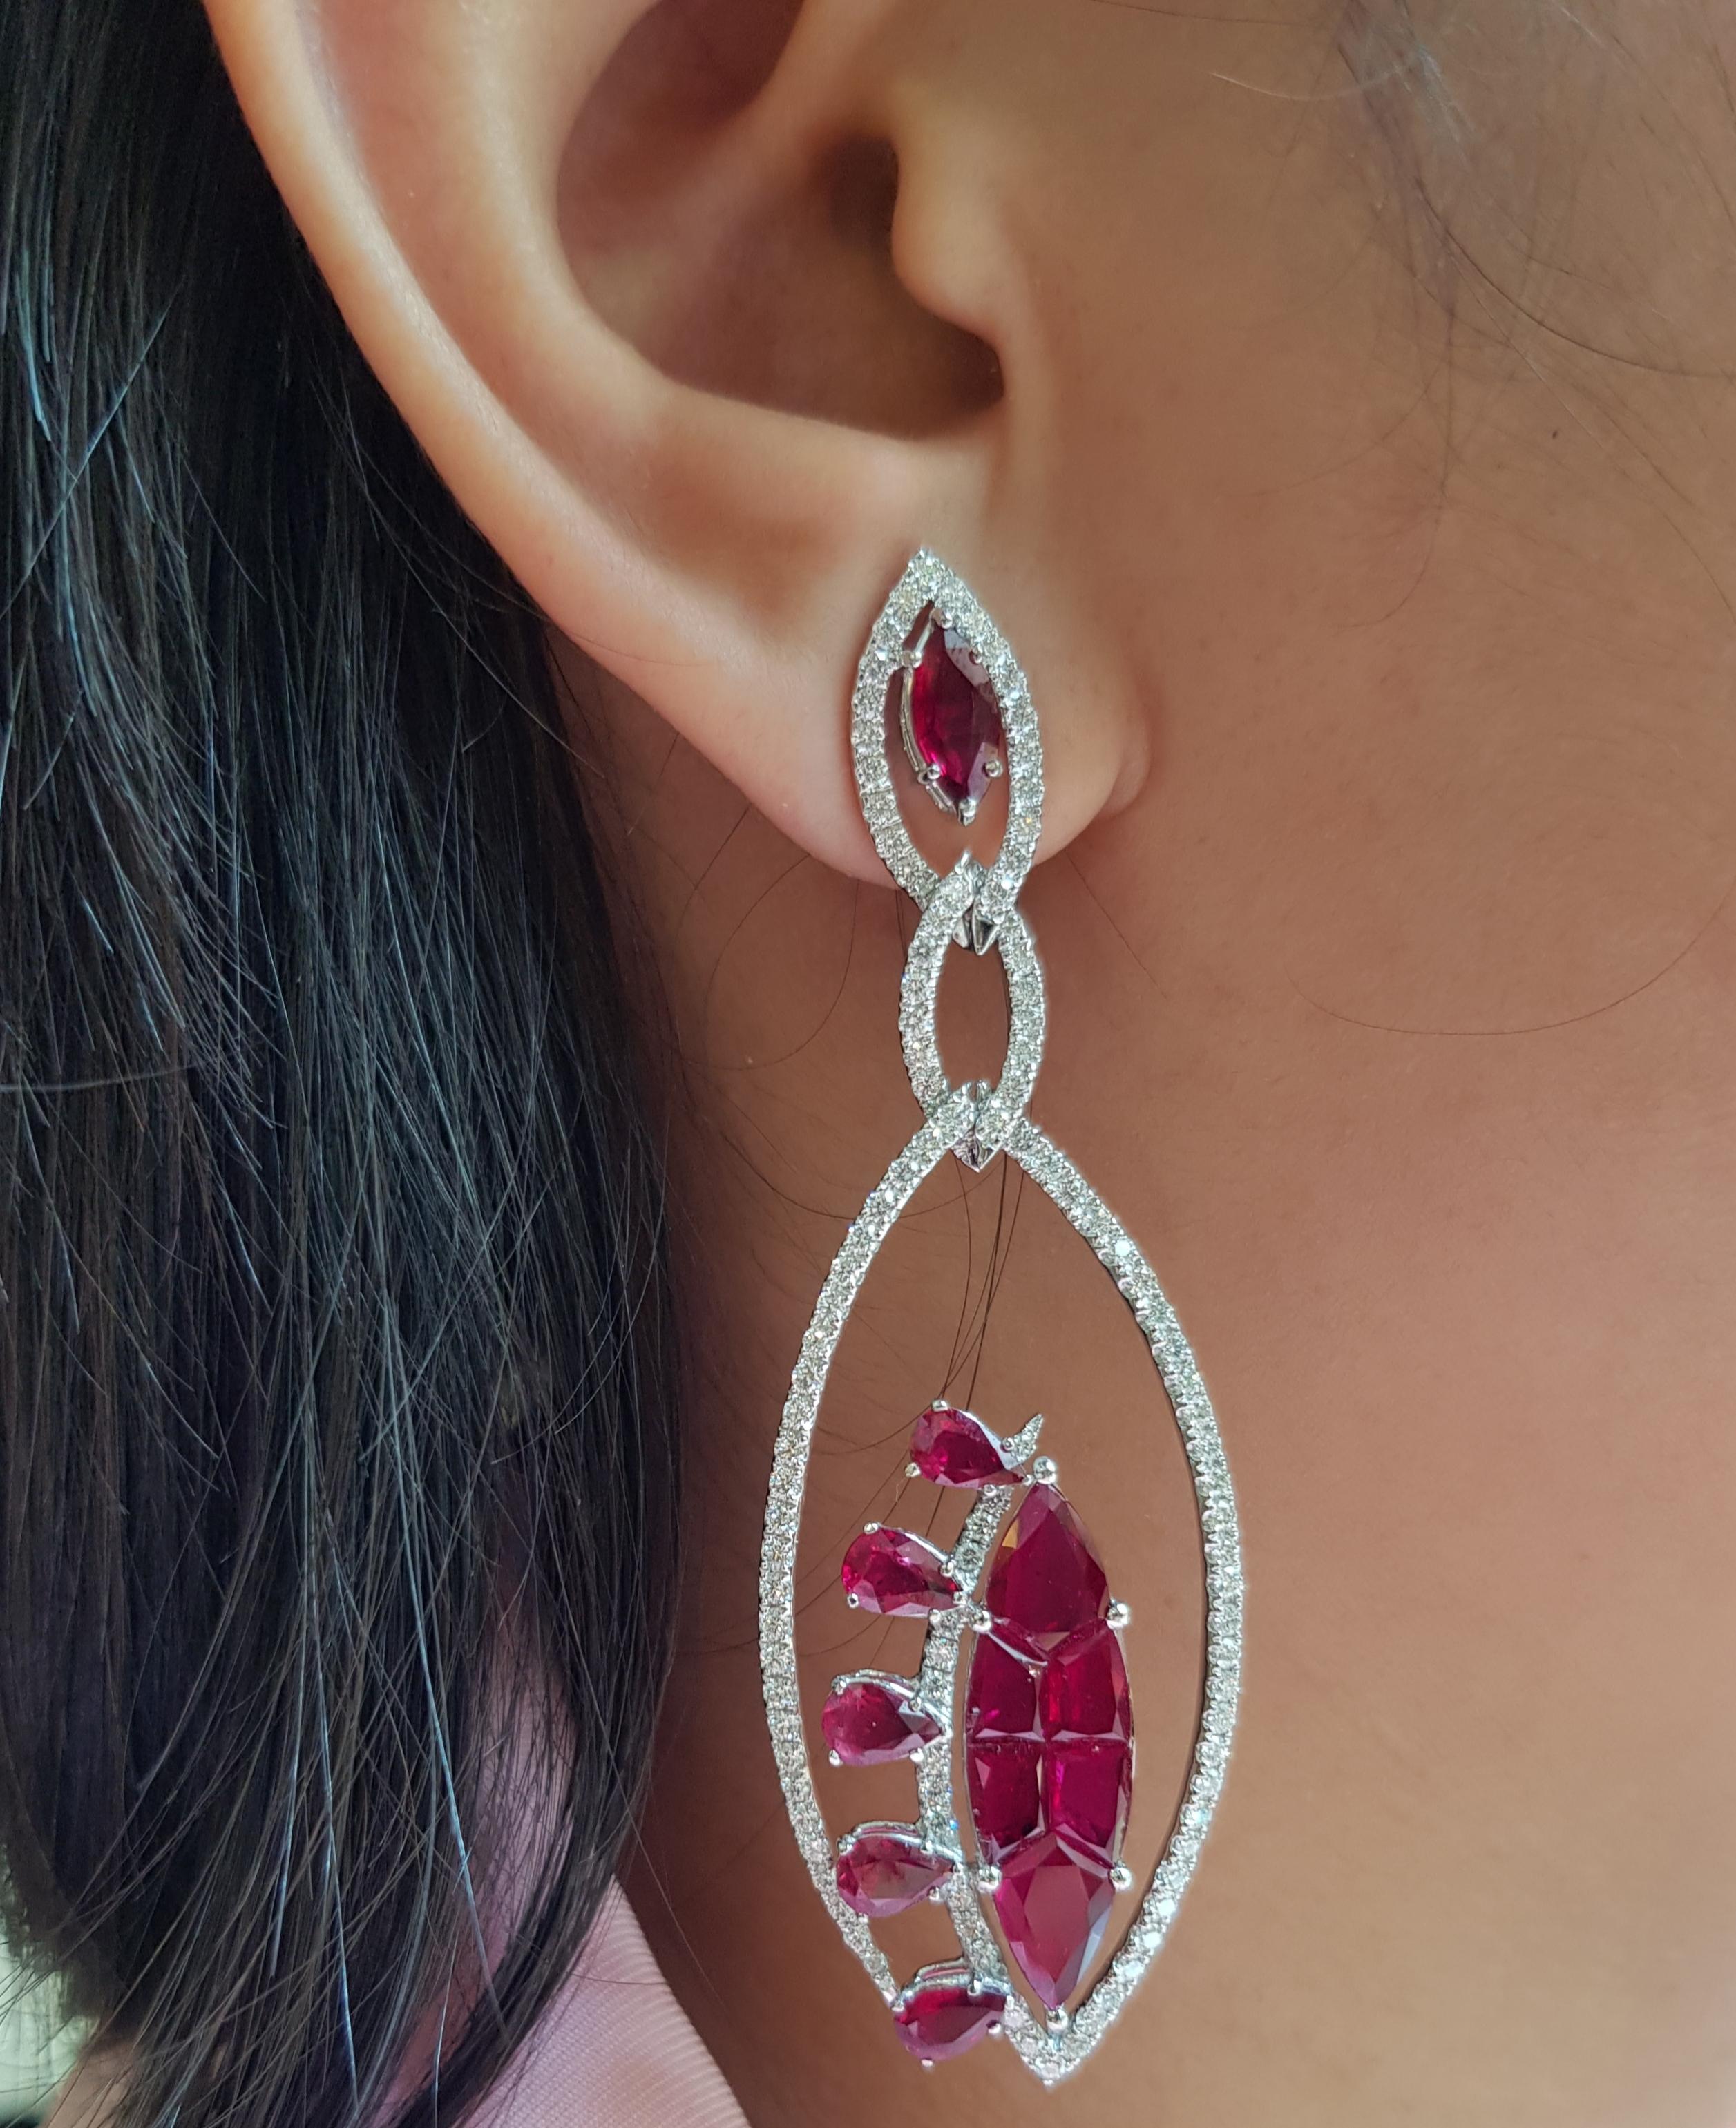 Ruby 15.24 carats with Diamond 2.70 carats Earrings set in 18 Karat White Gold Settings

Width:  2.2 cm 
Length: 7.0 cm
Total Weight: 24.15 grams

